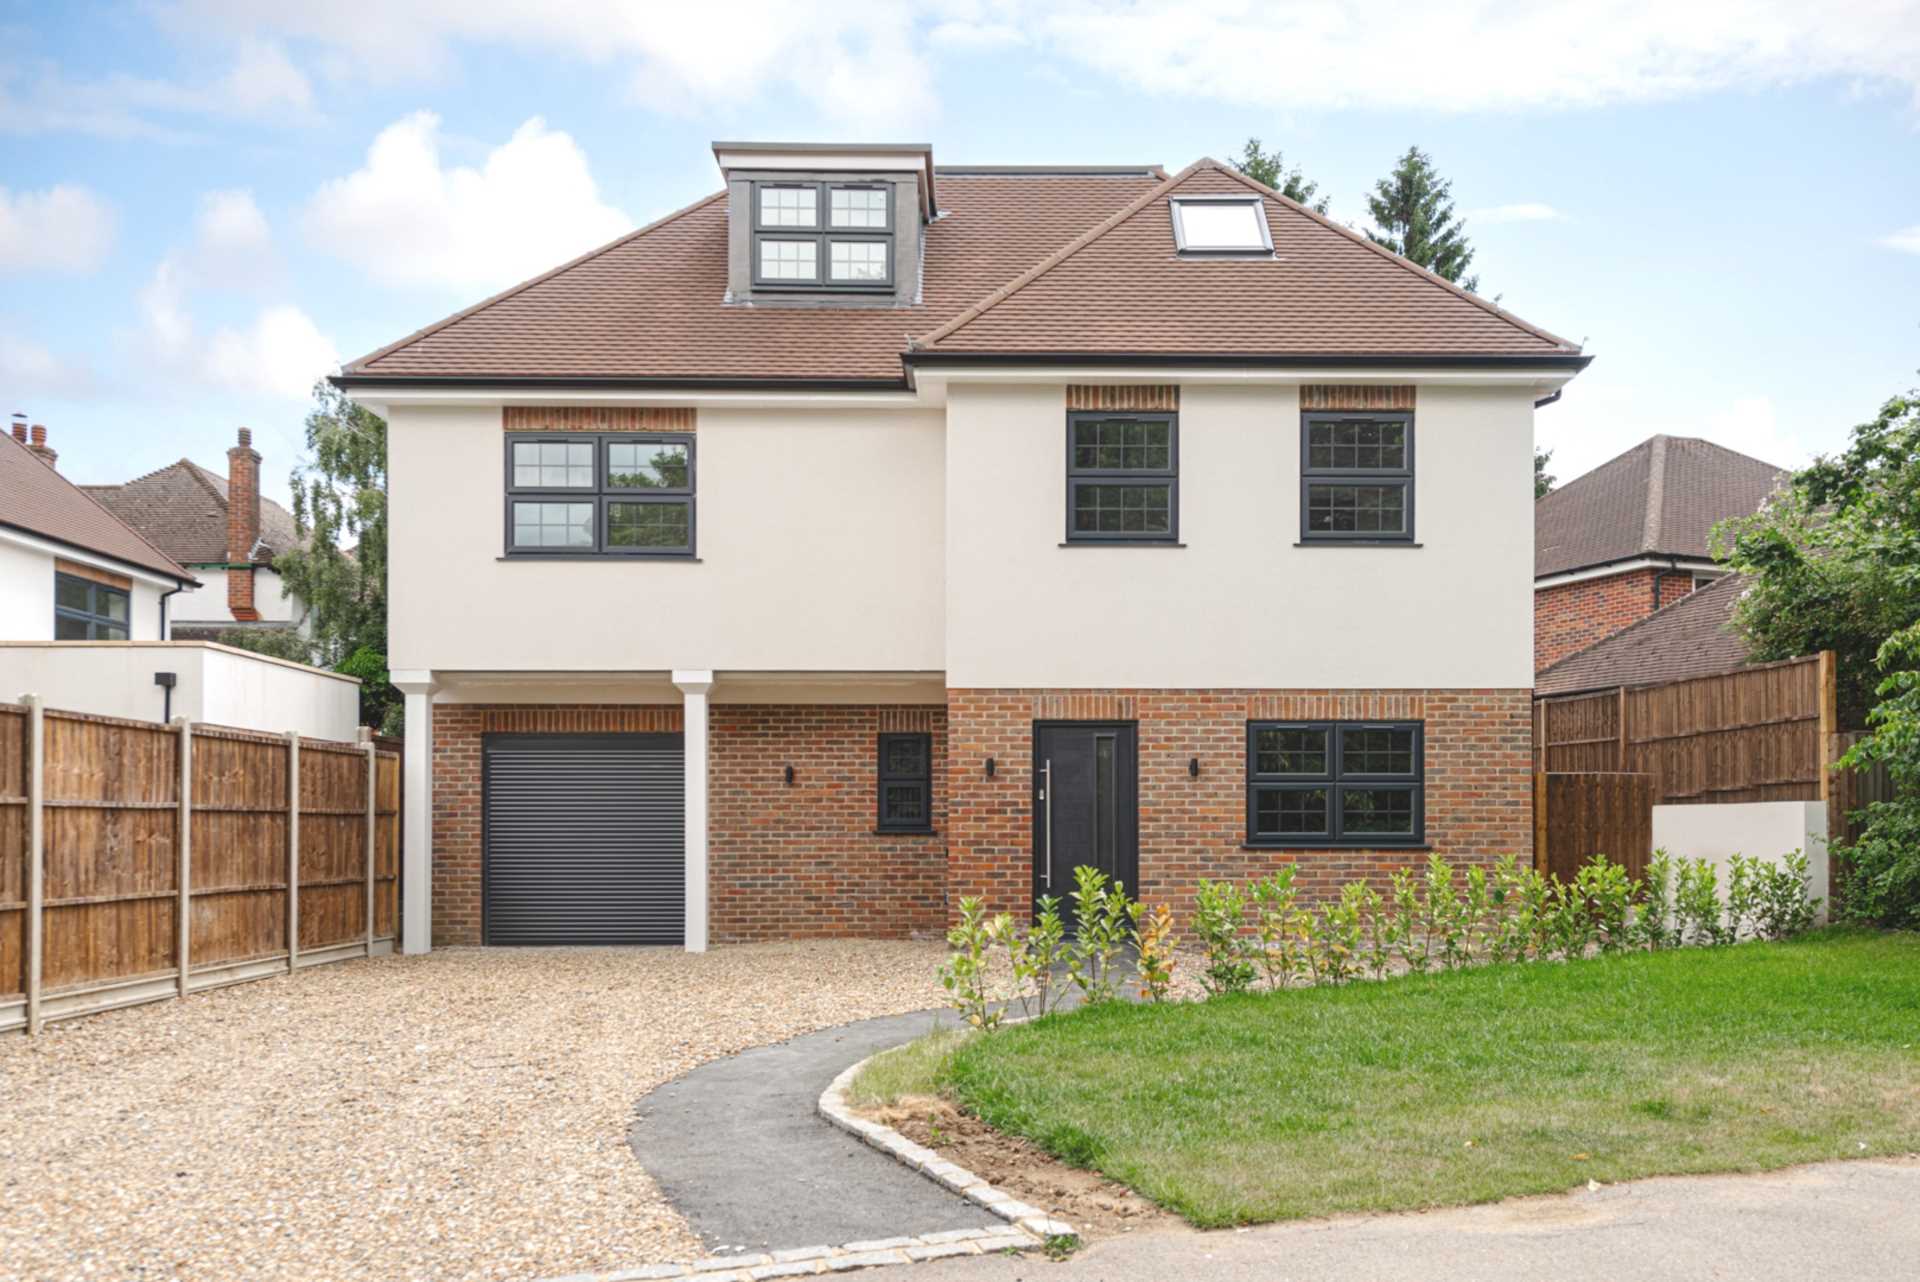 5 bed Detached House for rent in Epsom. From The Personal Agent - Epsom